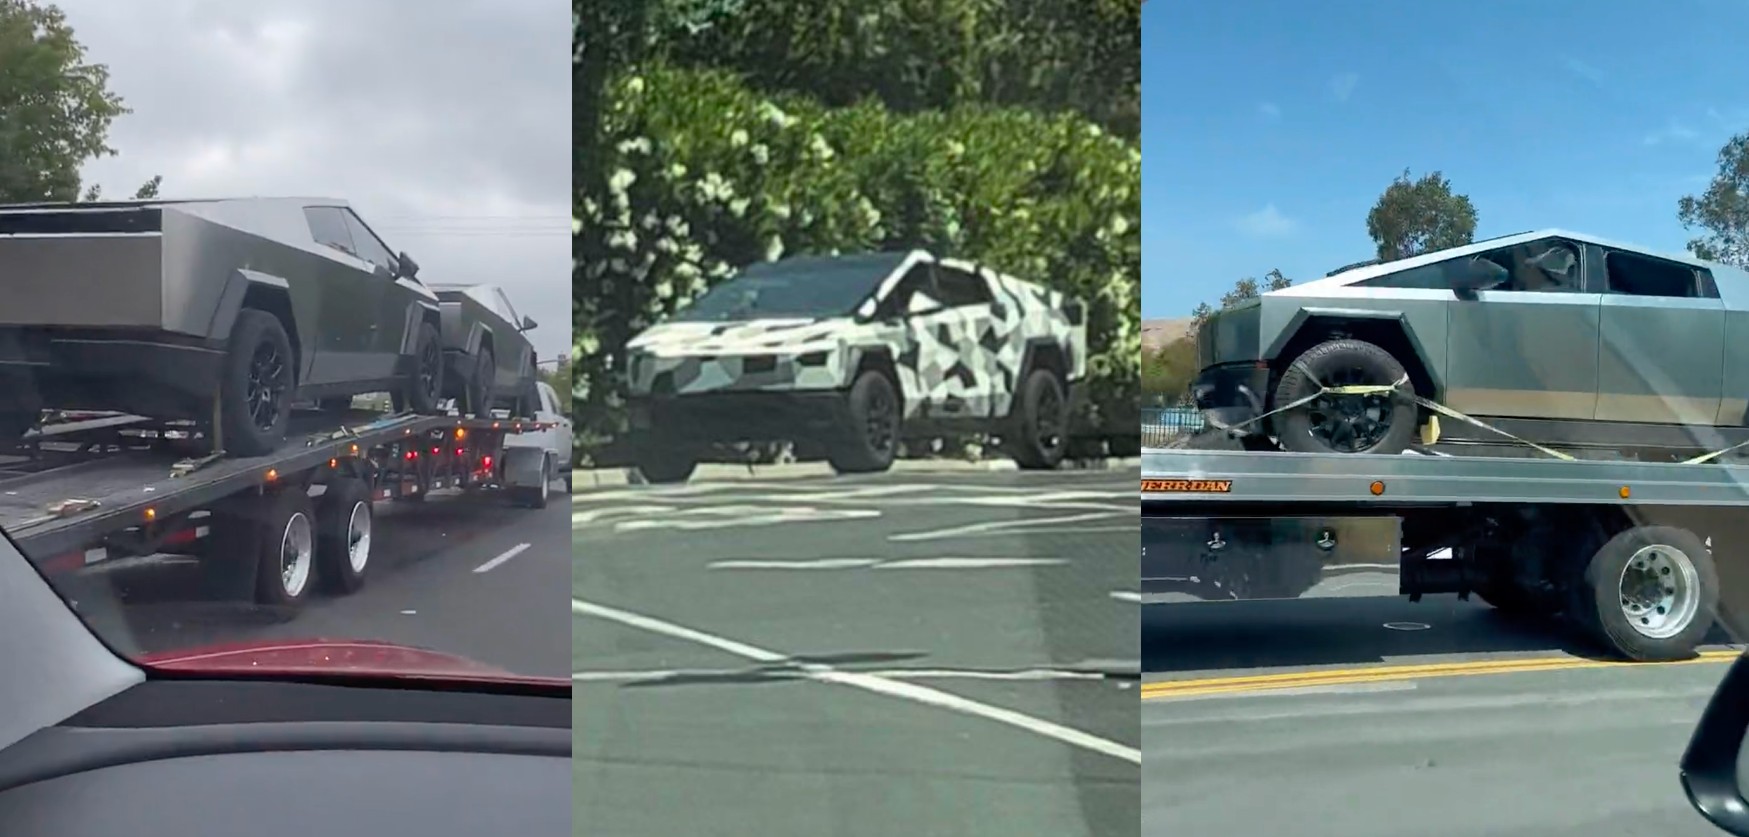 Multiple Tesla Cybertrucks sighted as anticipation builds for initial production